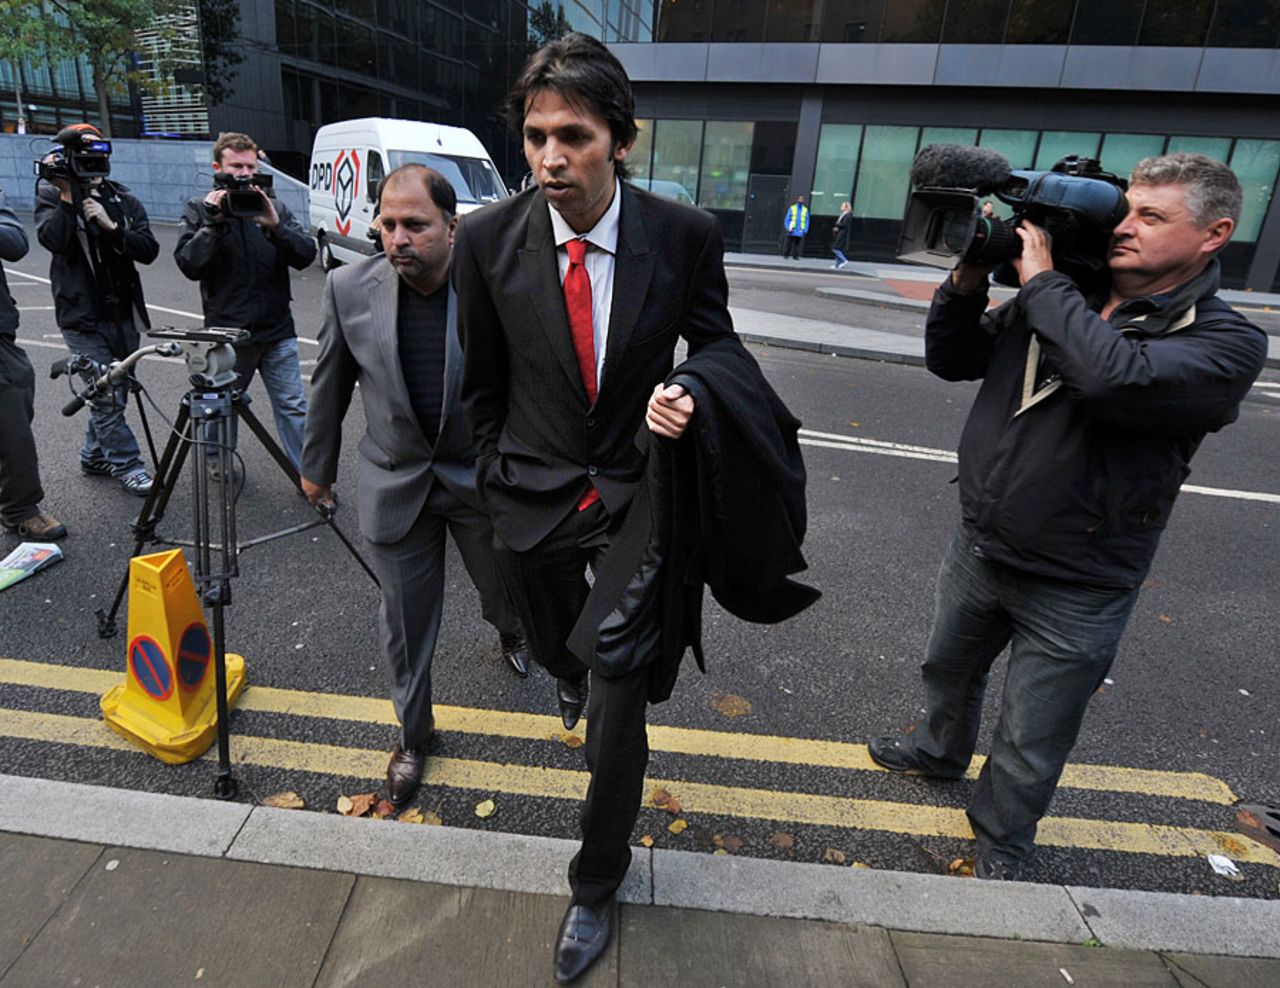 Mohammad Asif arrives at court as the jury continue their deliberations, London, October 28, 2011